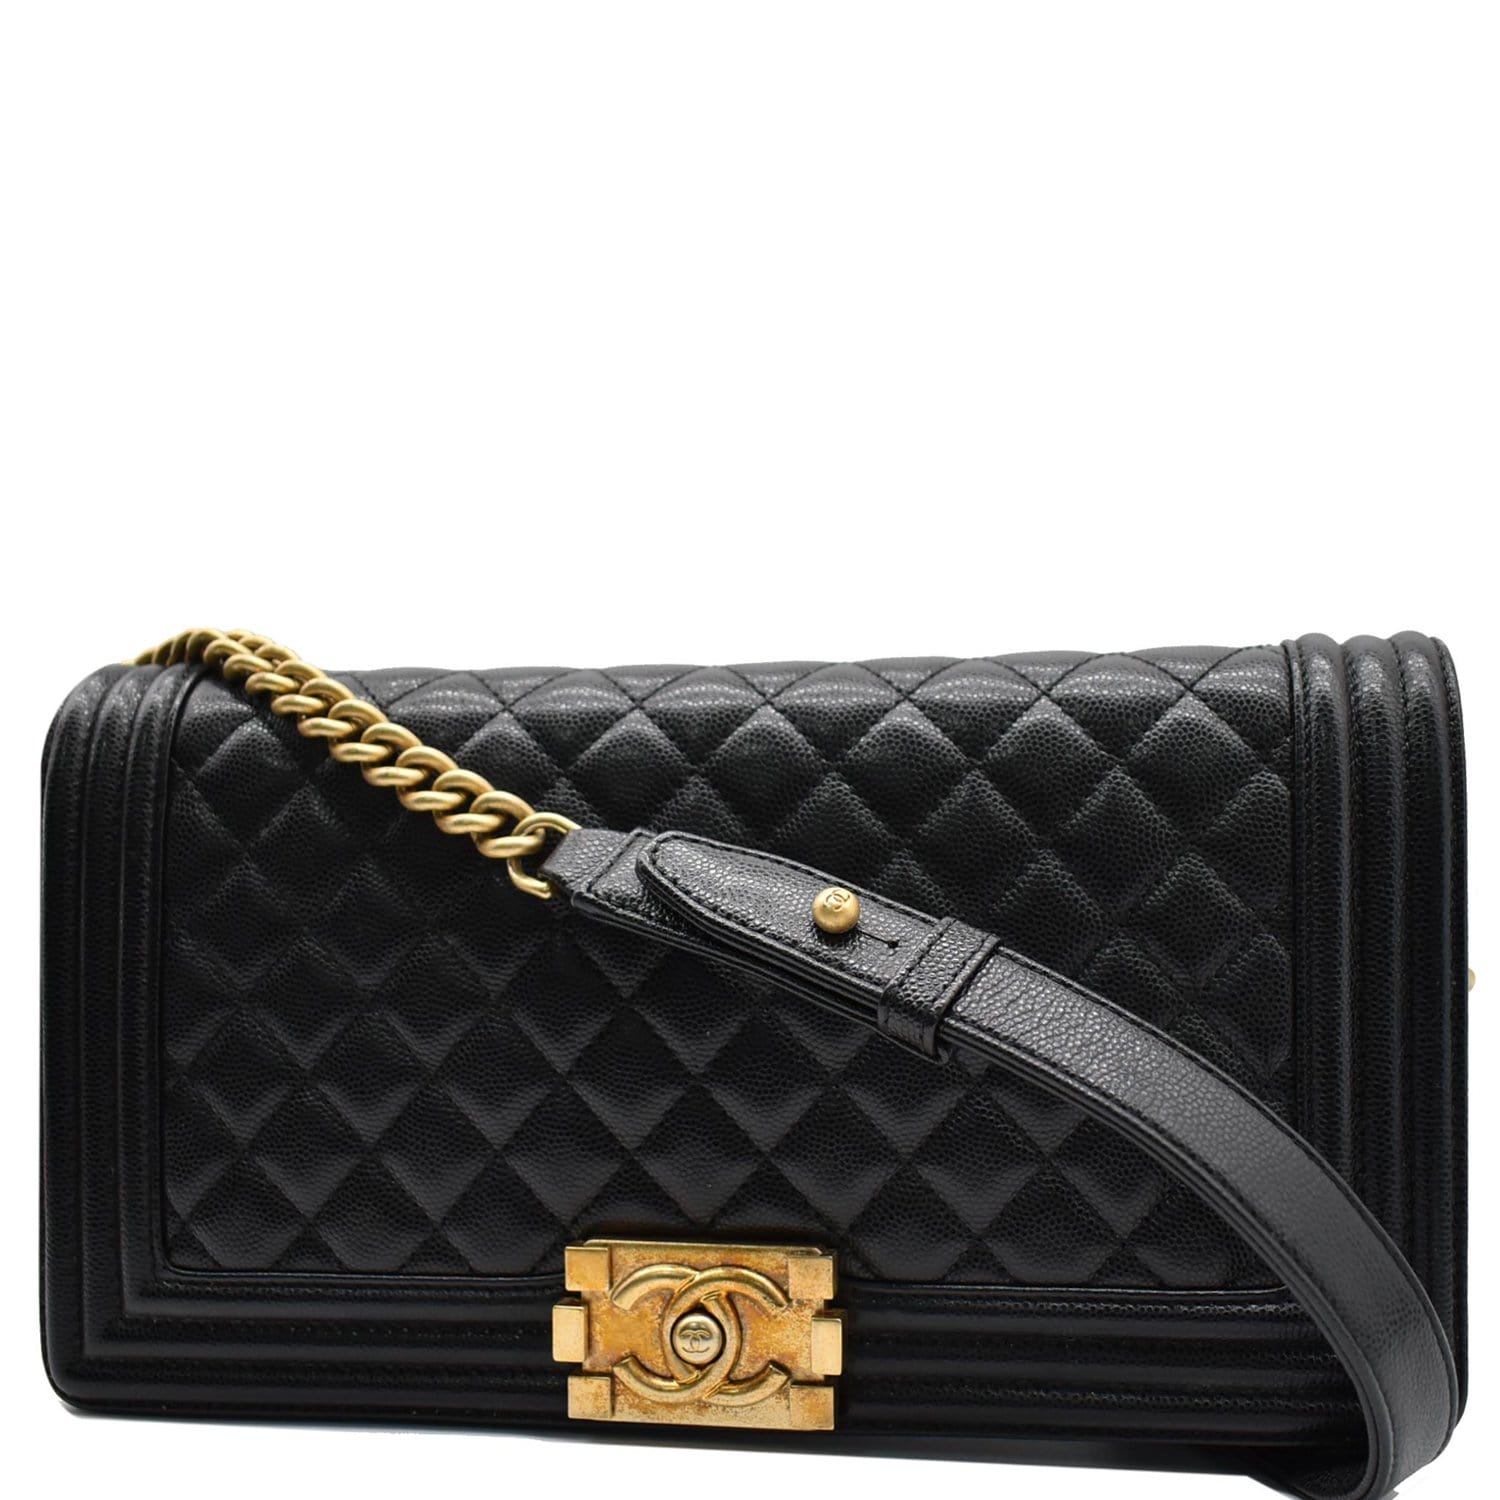 Search results for: 'chanel caviar leather shoulder bag 42168